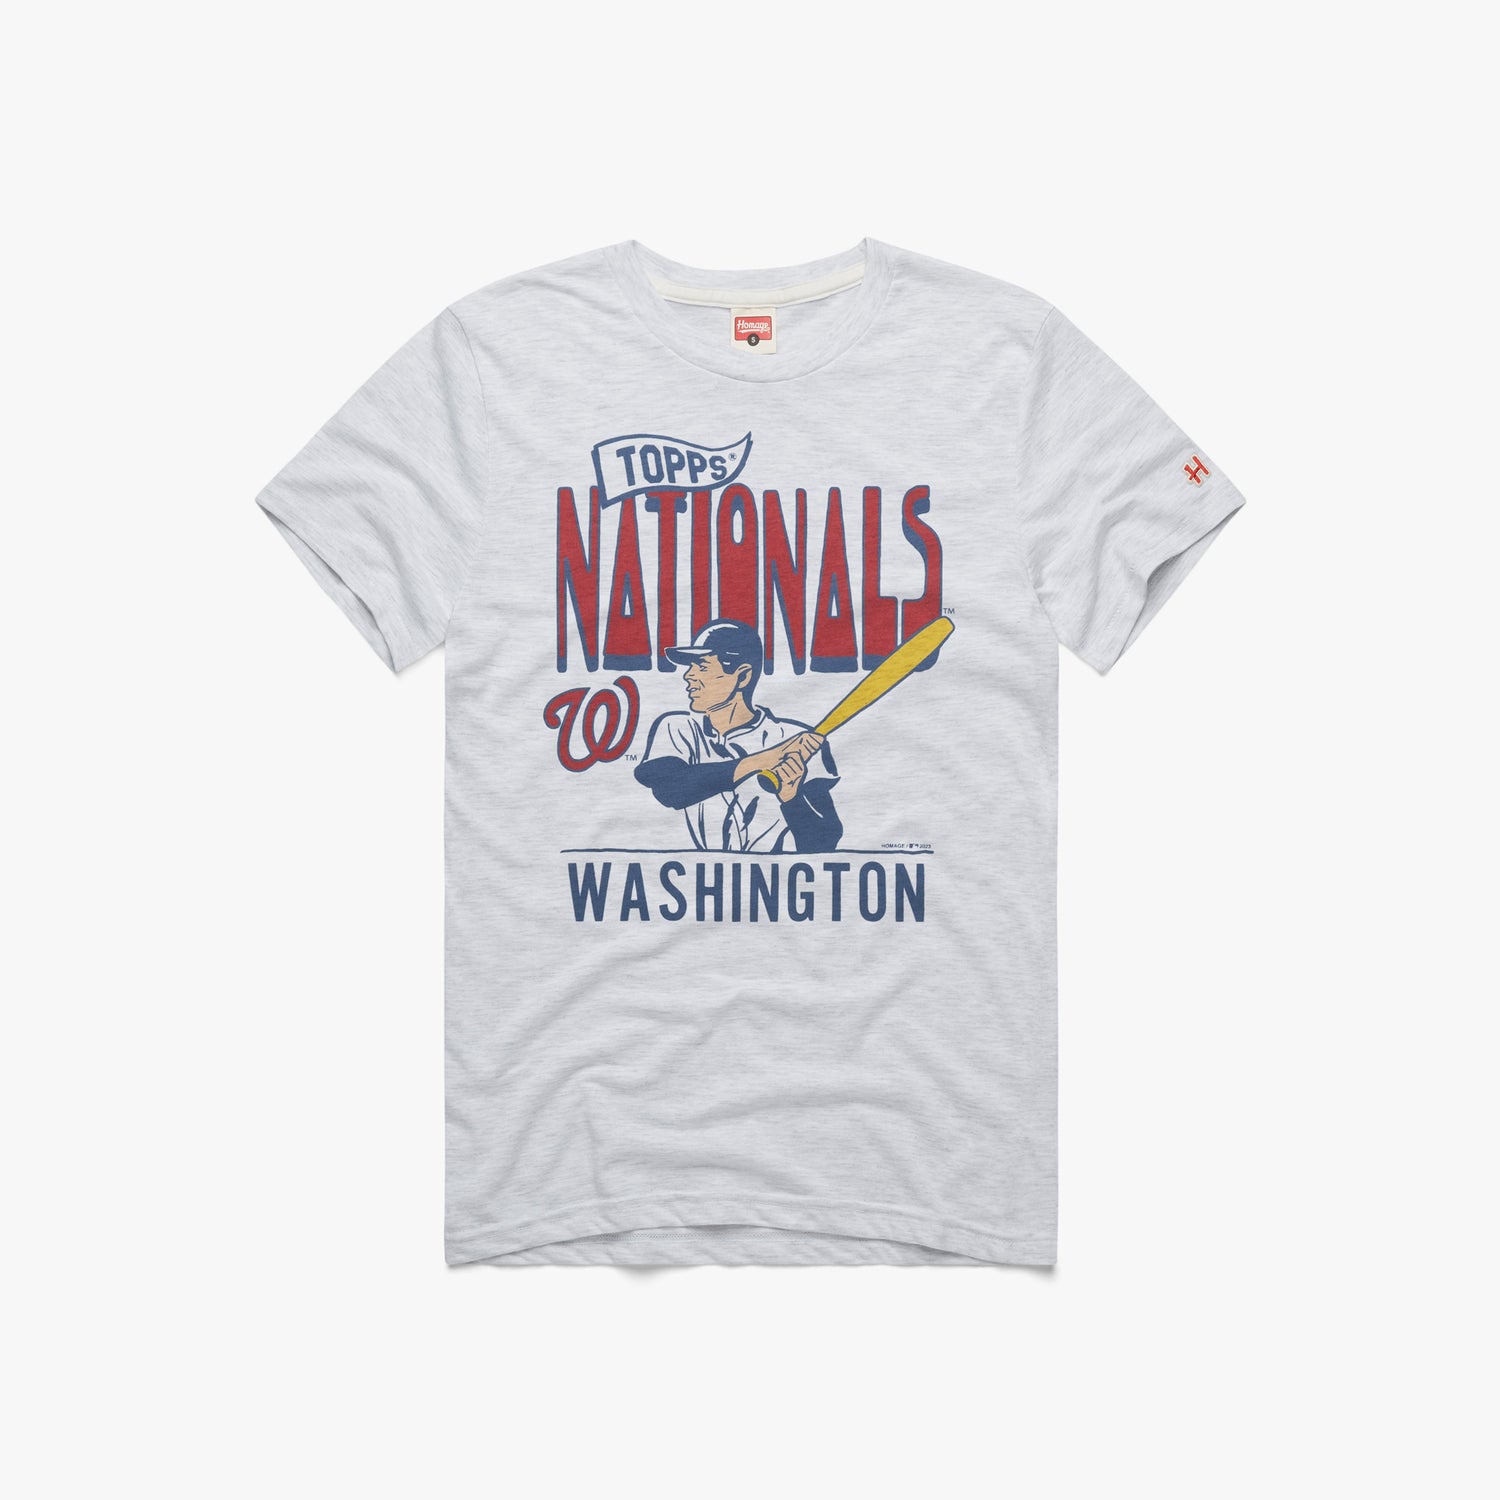 MLB x Topps Washington Nationals T-Shirt from Homage. | Ash | Vintage Apparel from Homage.